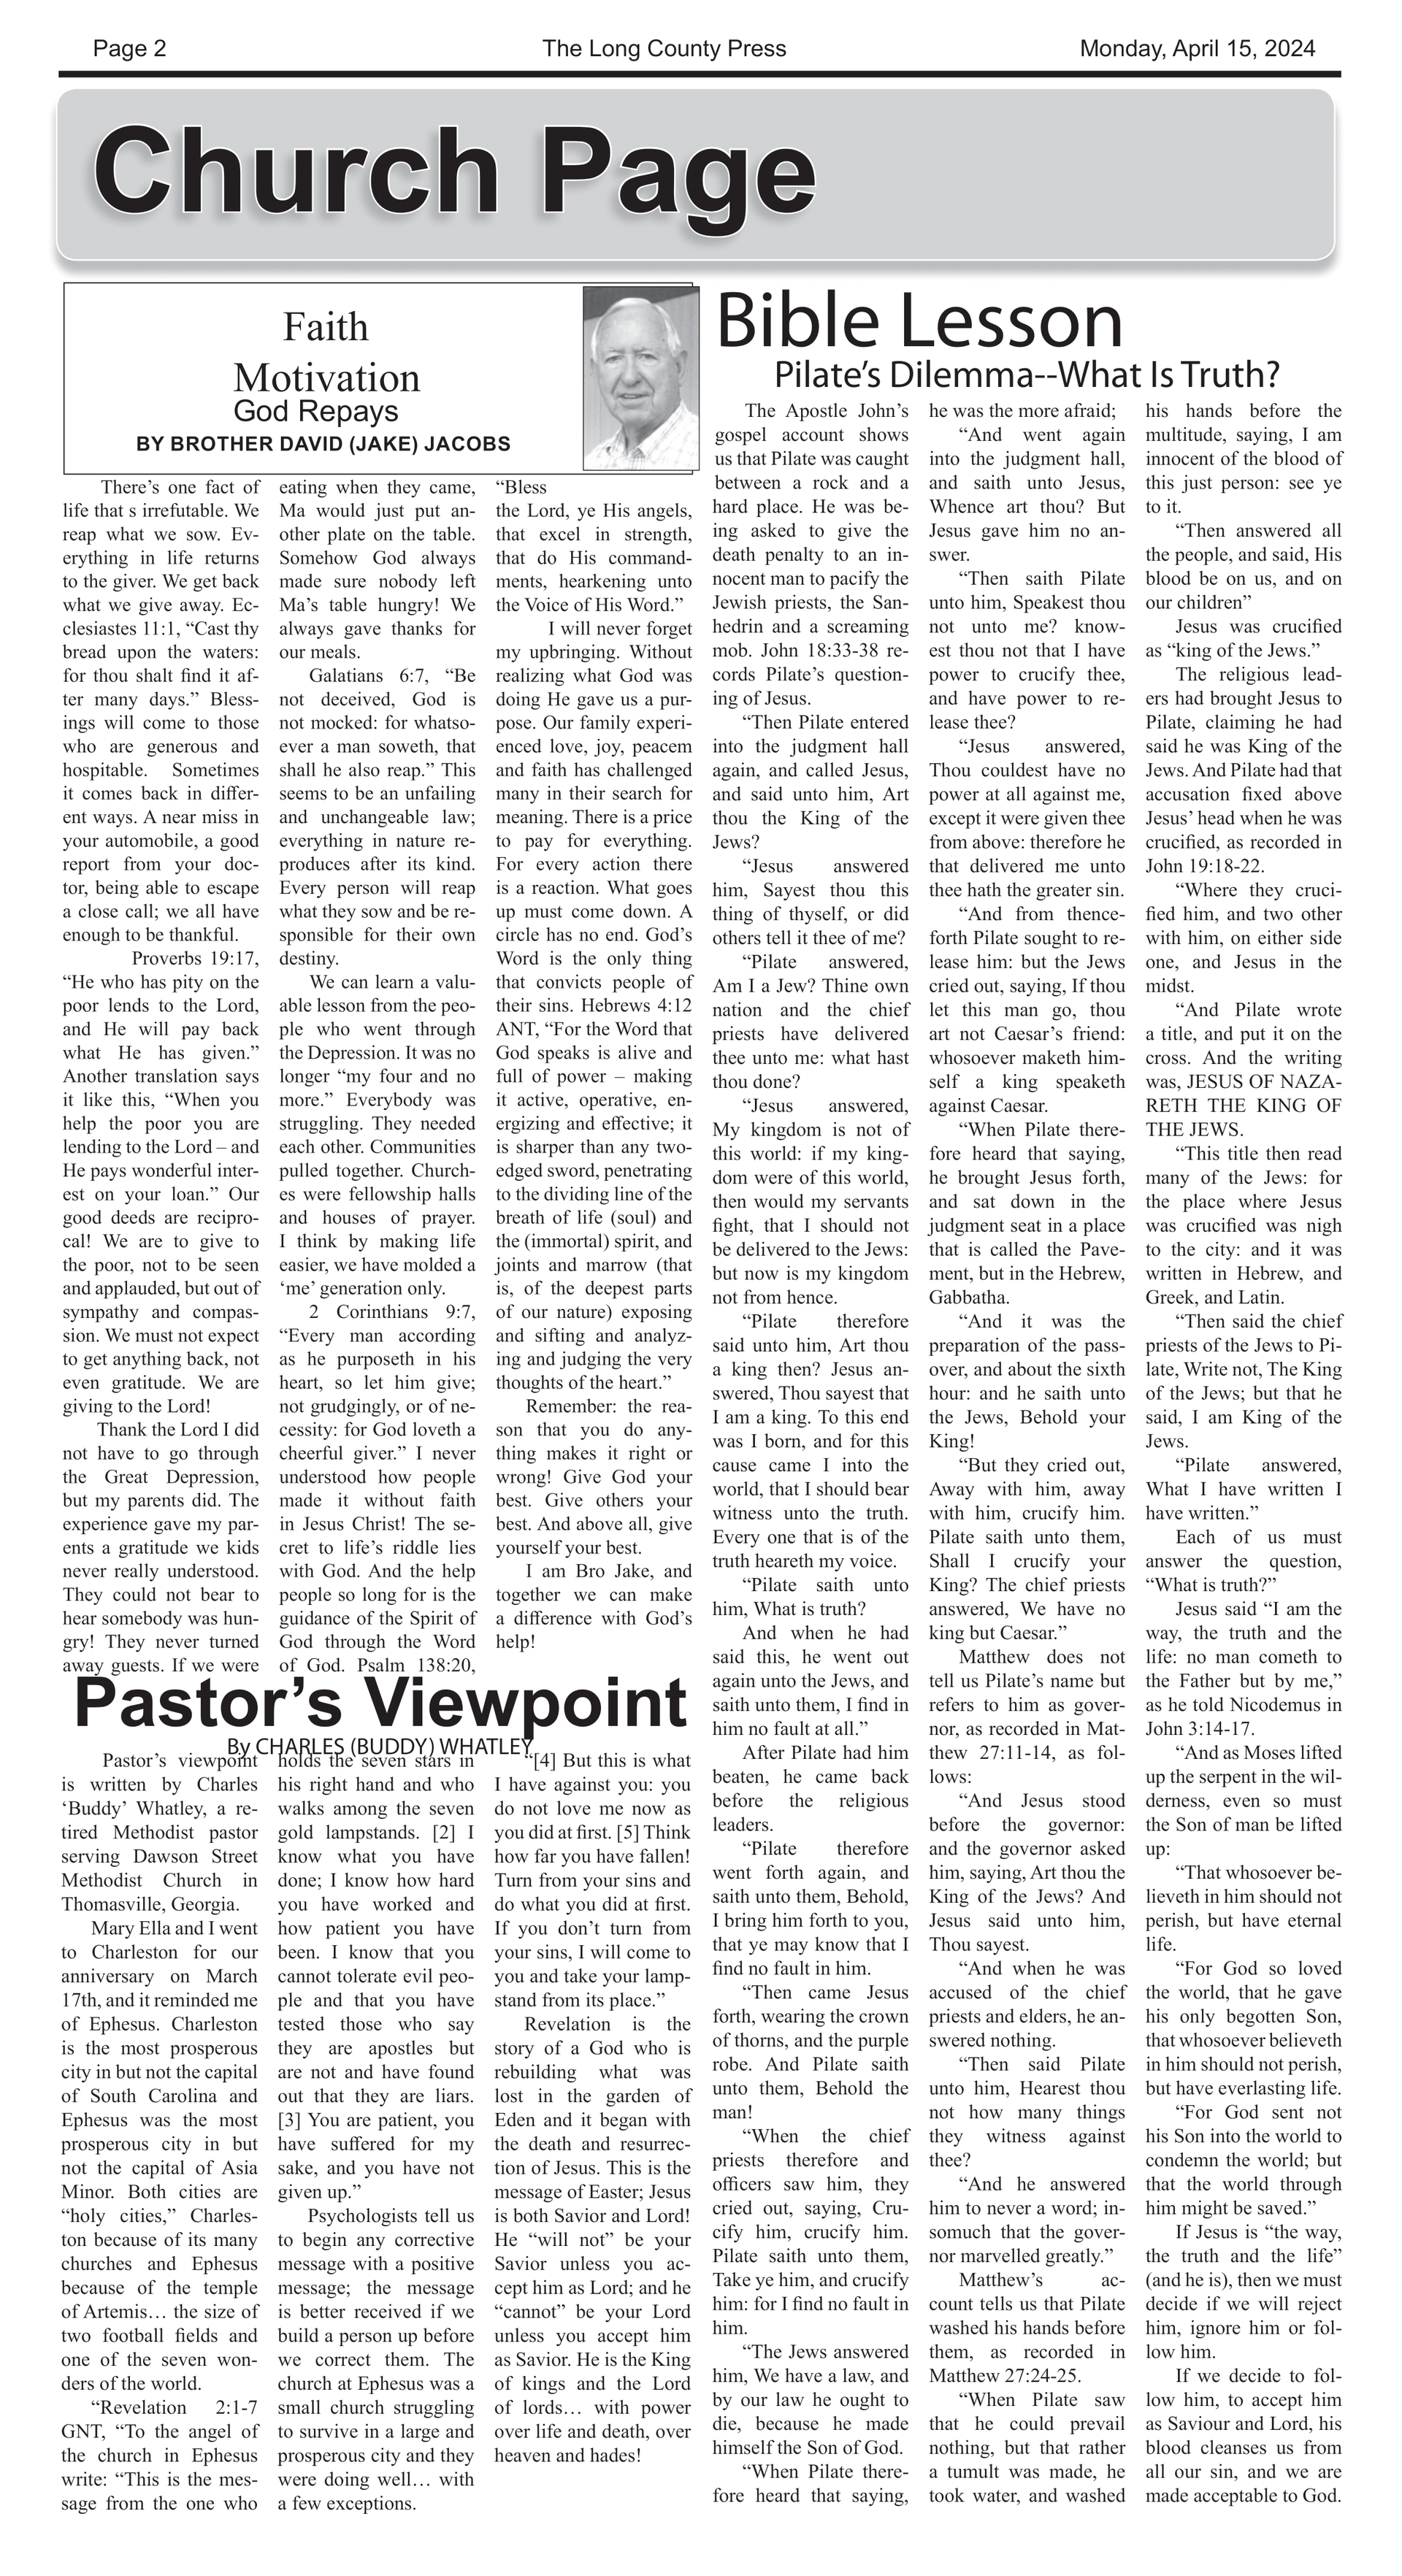 A newspaper article about pastor 's viewpoint is on the church page.